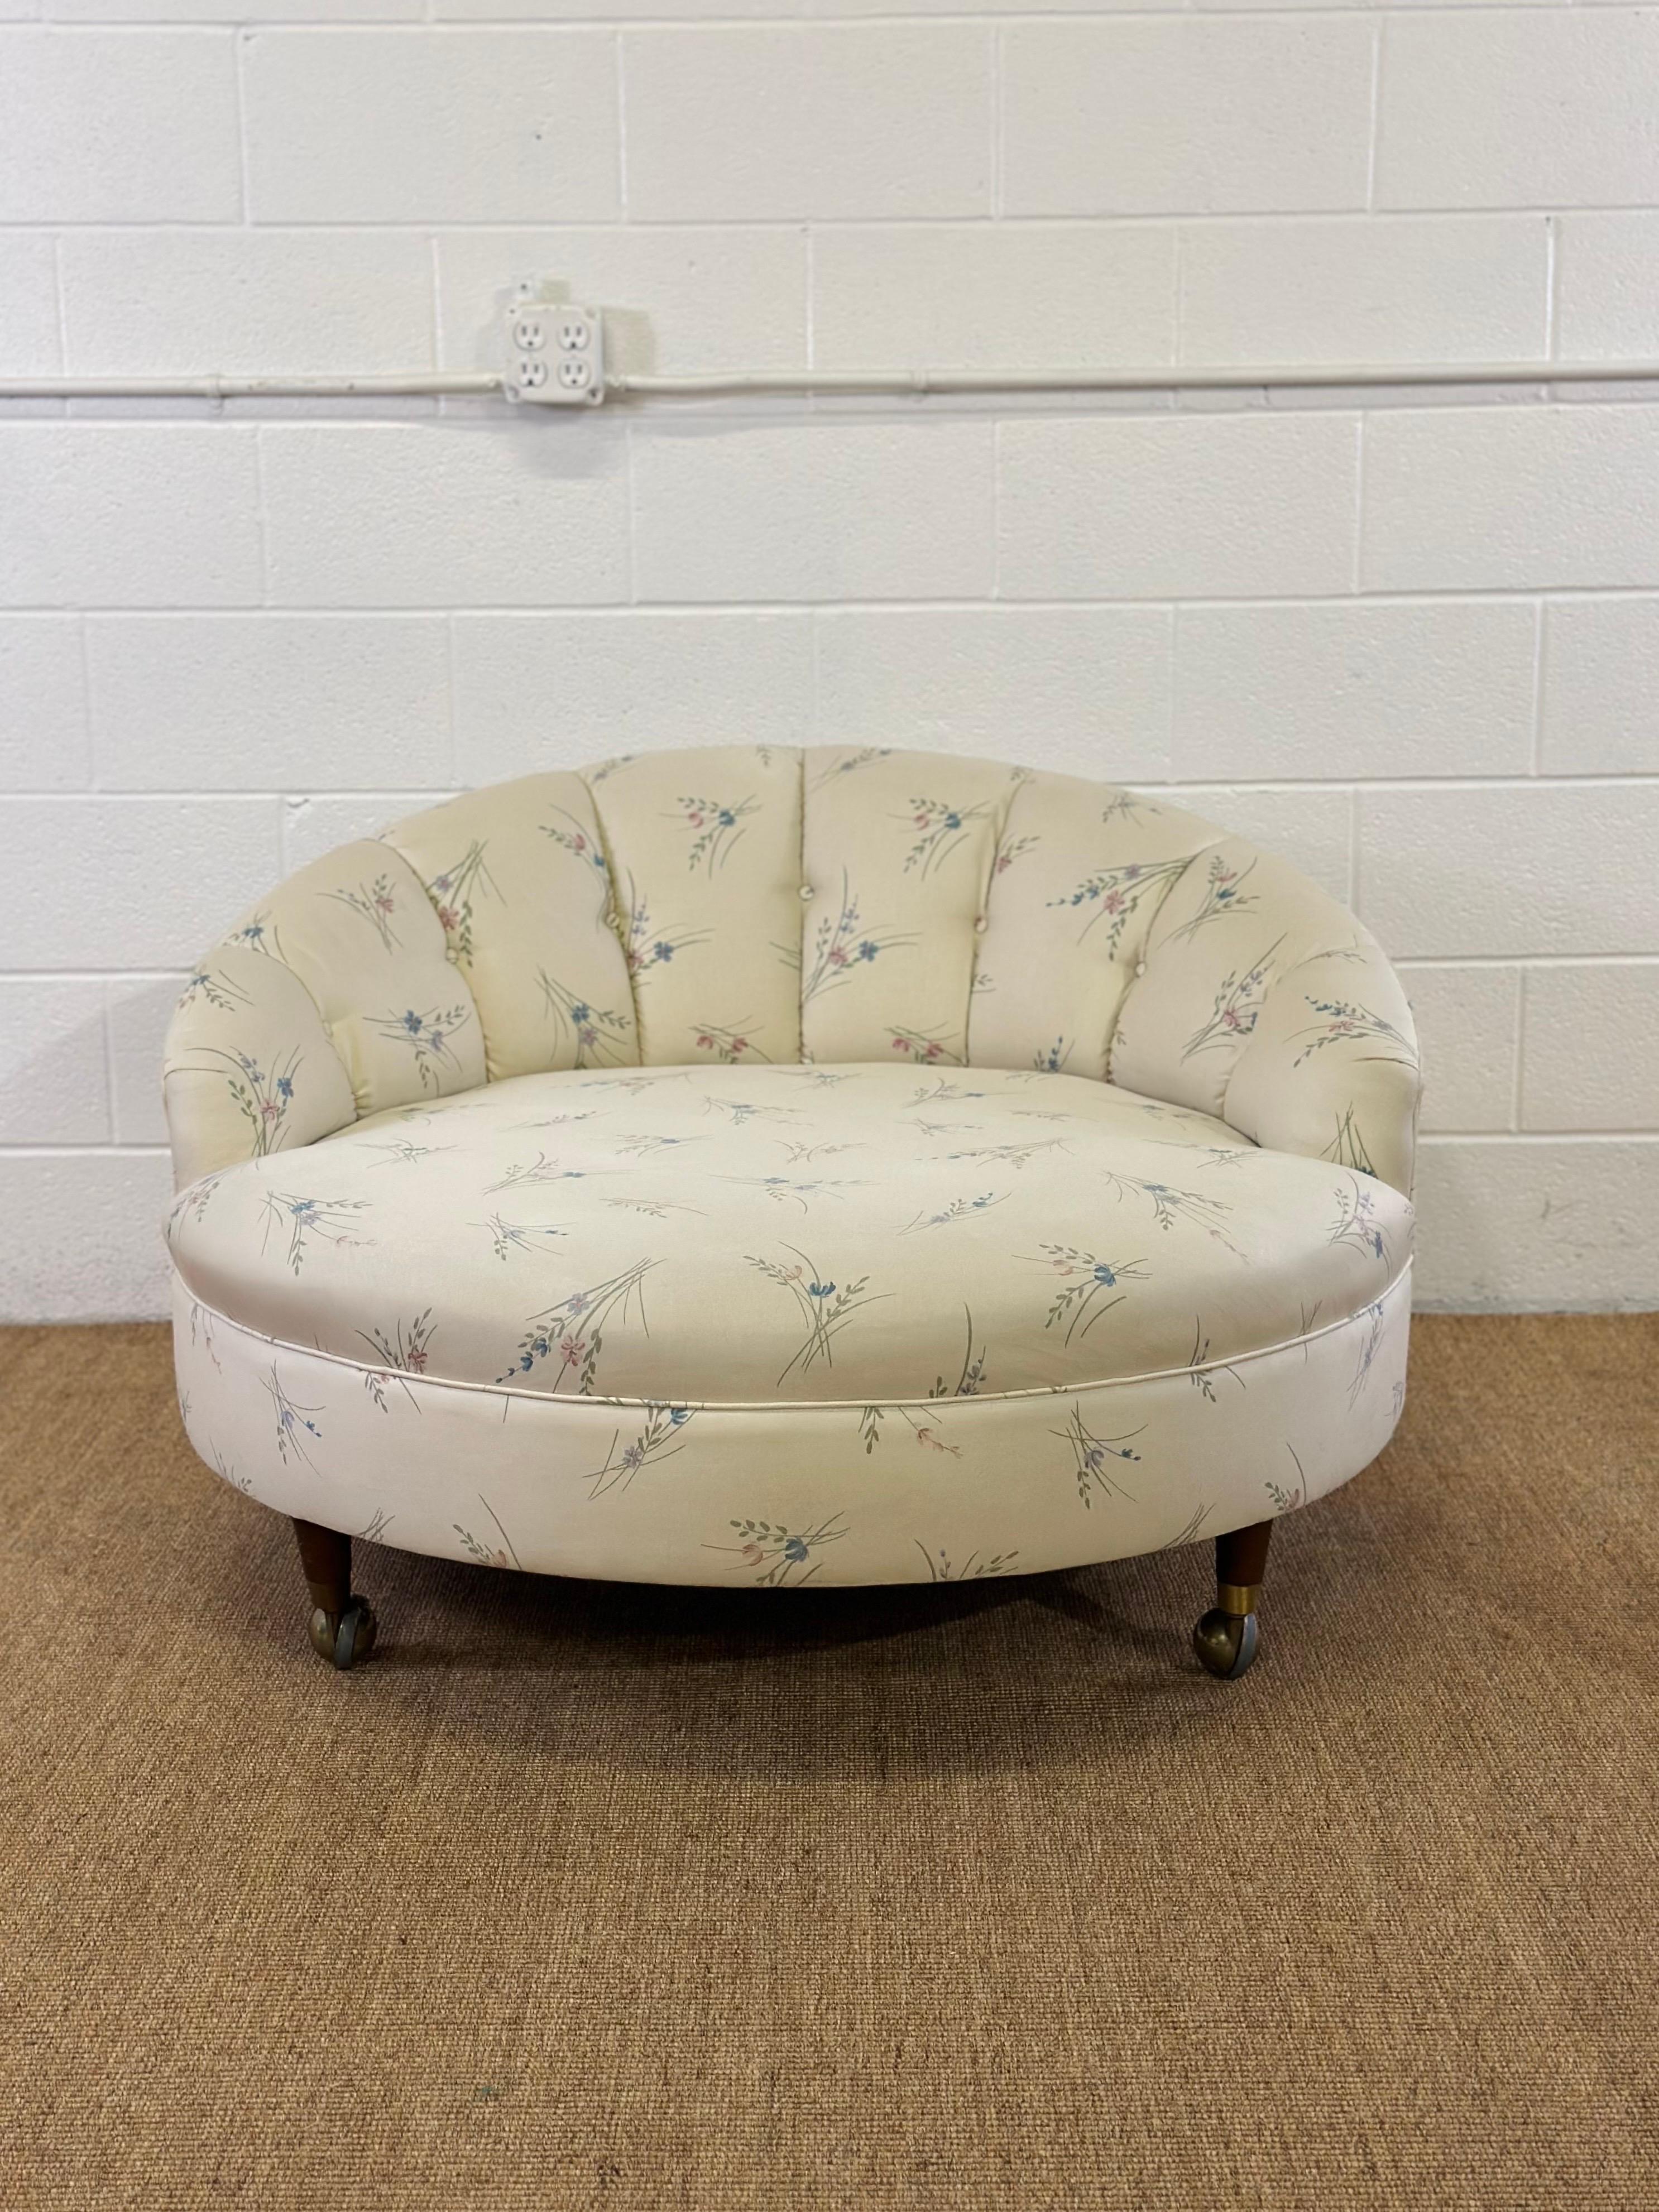 We are very pleased to offer a beautiful tub chair, circa the 1970s.  This exquisite piece stands out with its significantly oversized design and an alluring barrel back that merges sophistication with unparalleled comfort, making it a timeless